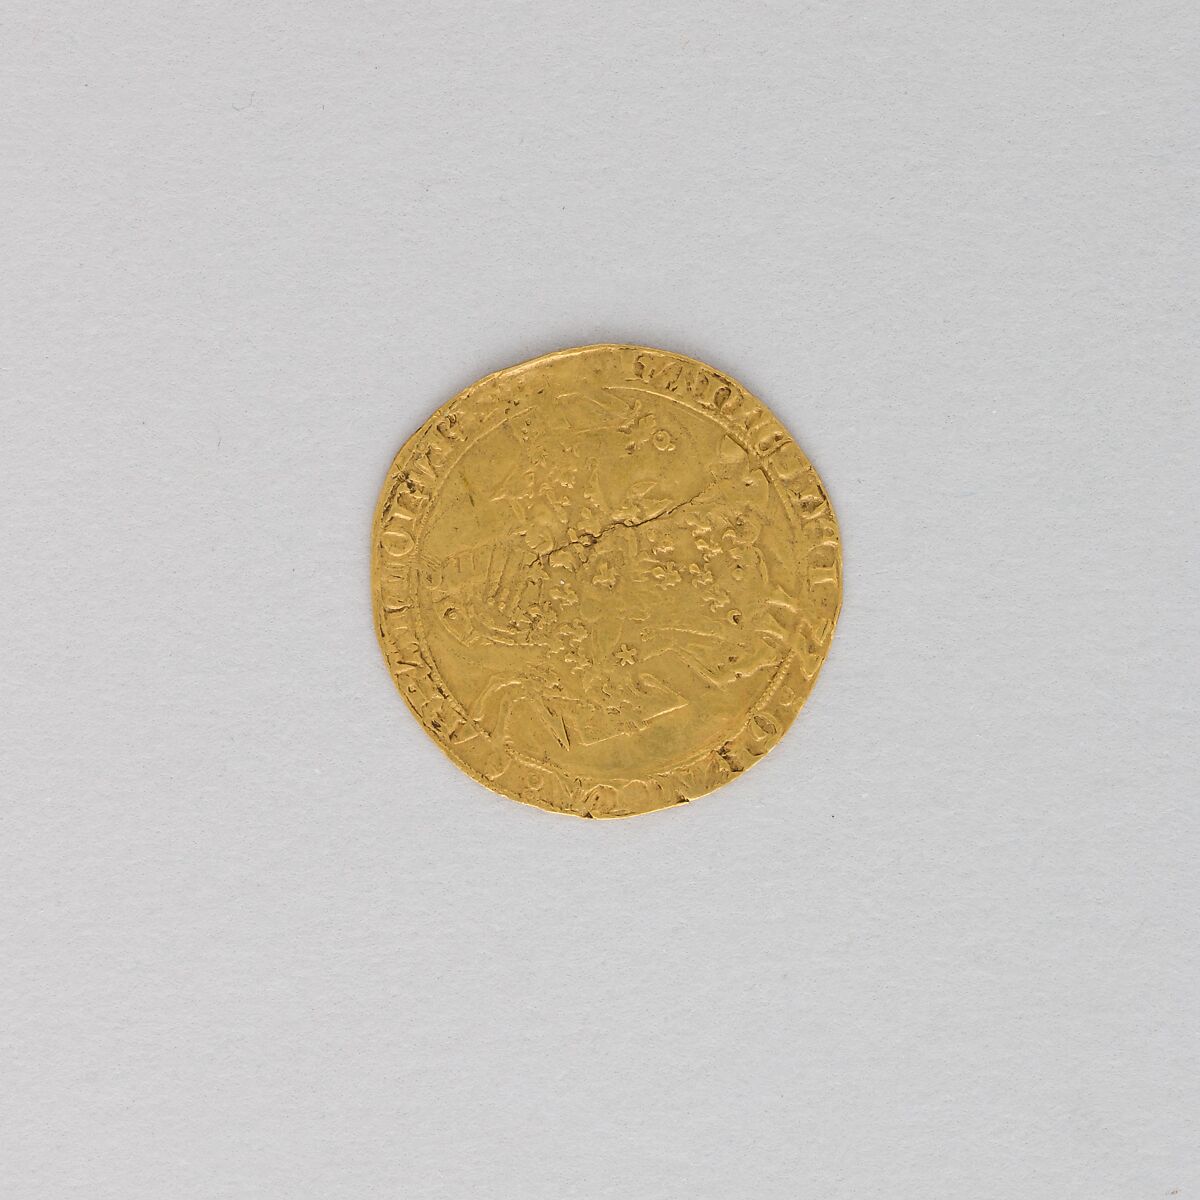 Coin (Franc) Showing Jean Le Bon, Gold, French 